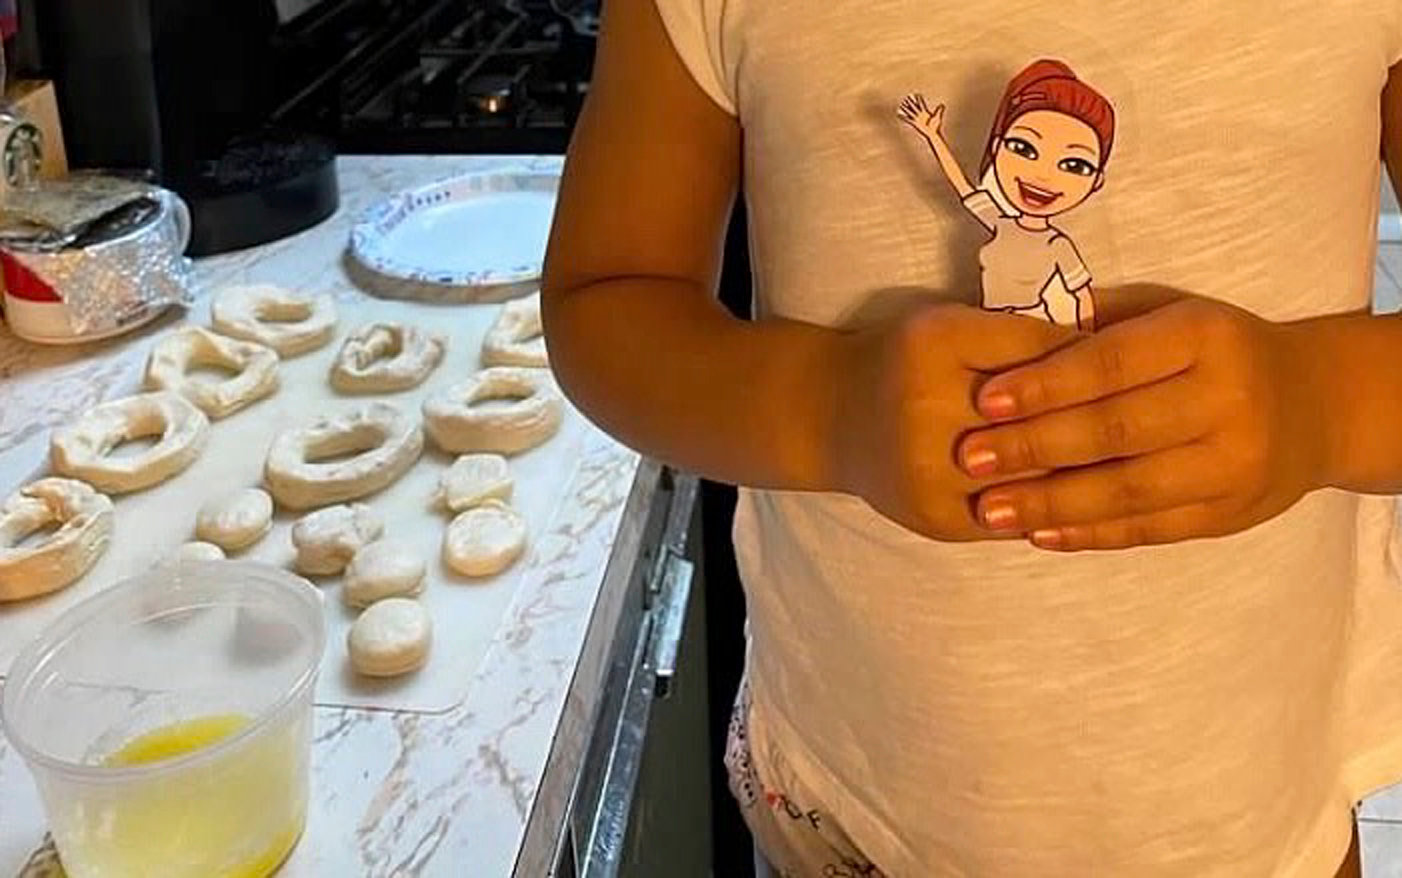 Teacher Patricia Minero sent a Bitmoji version of herself home with her students so they could pretend to do activities with each other. A student made donuts with hers.